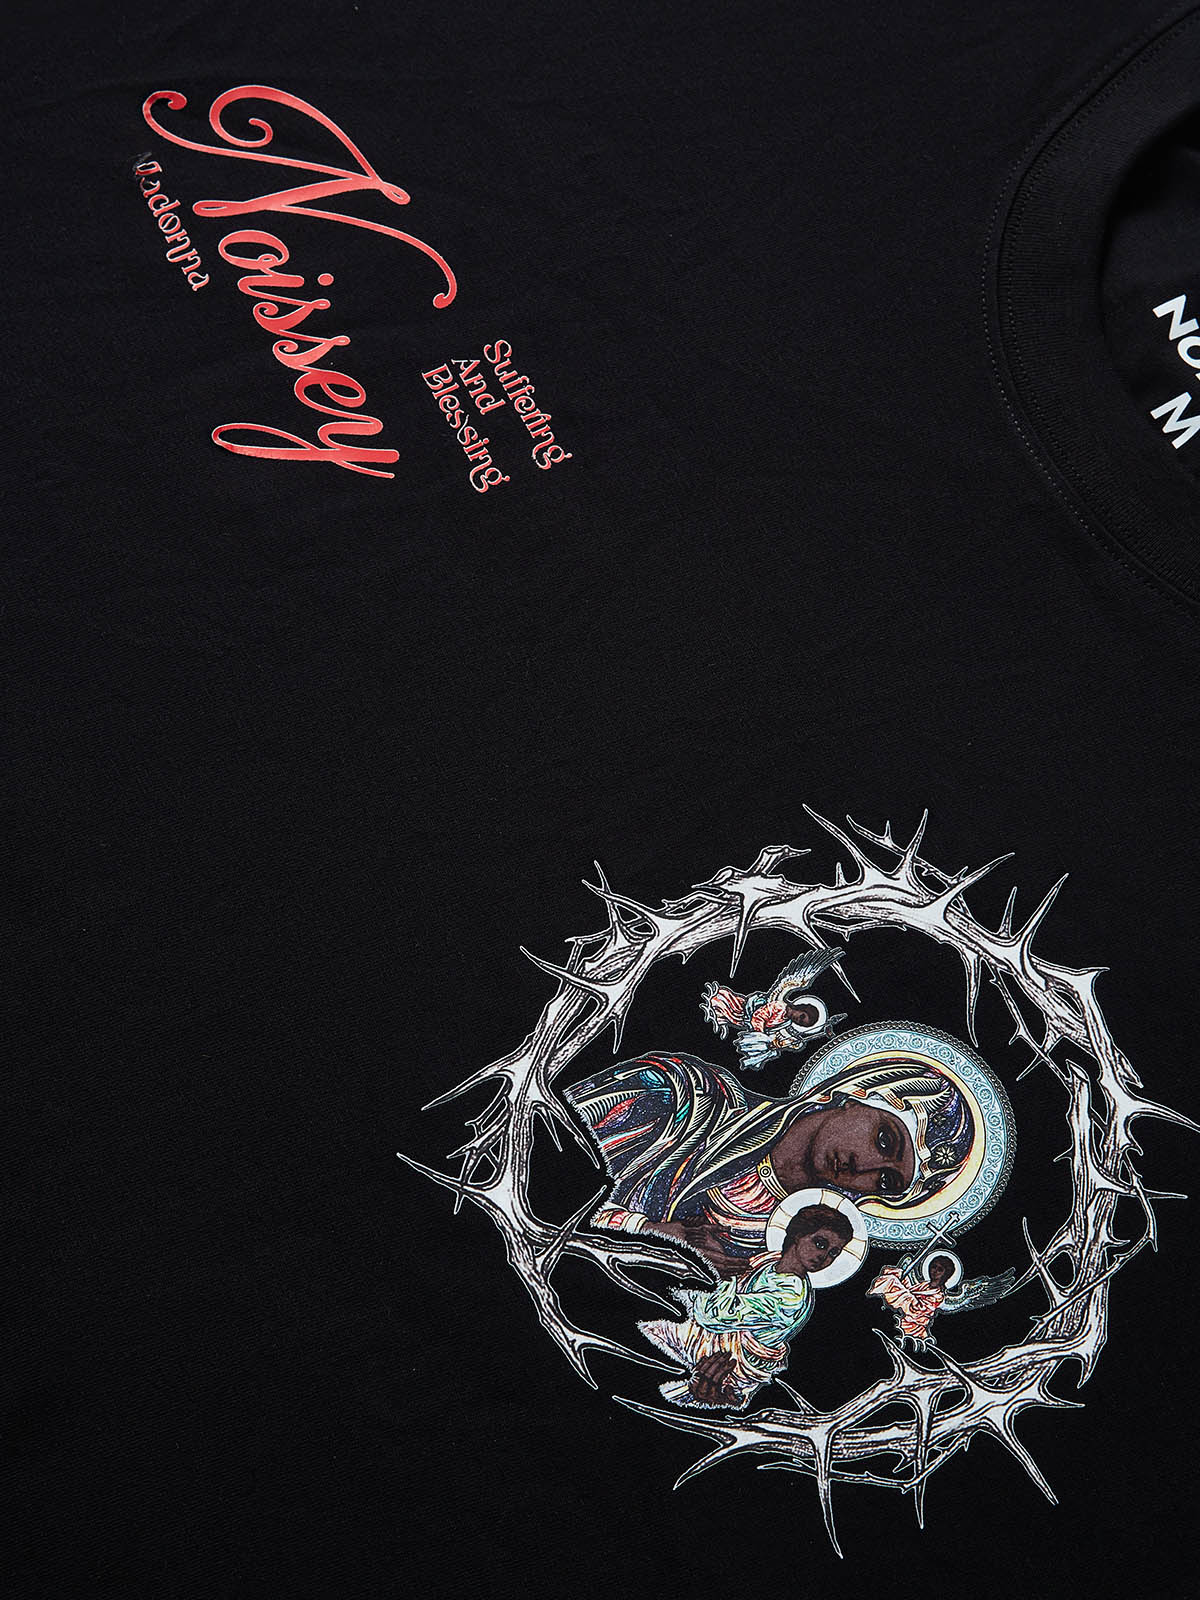 OBSTACLES & DANGERS© Noissey and Madonna and Child Tee